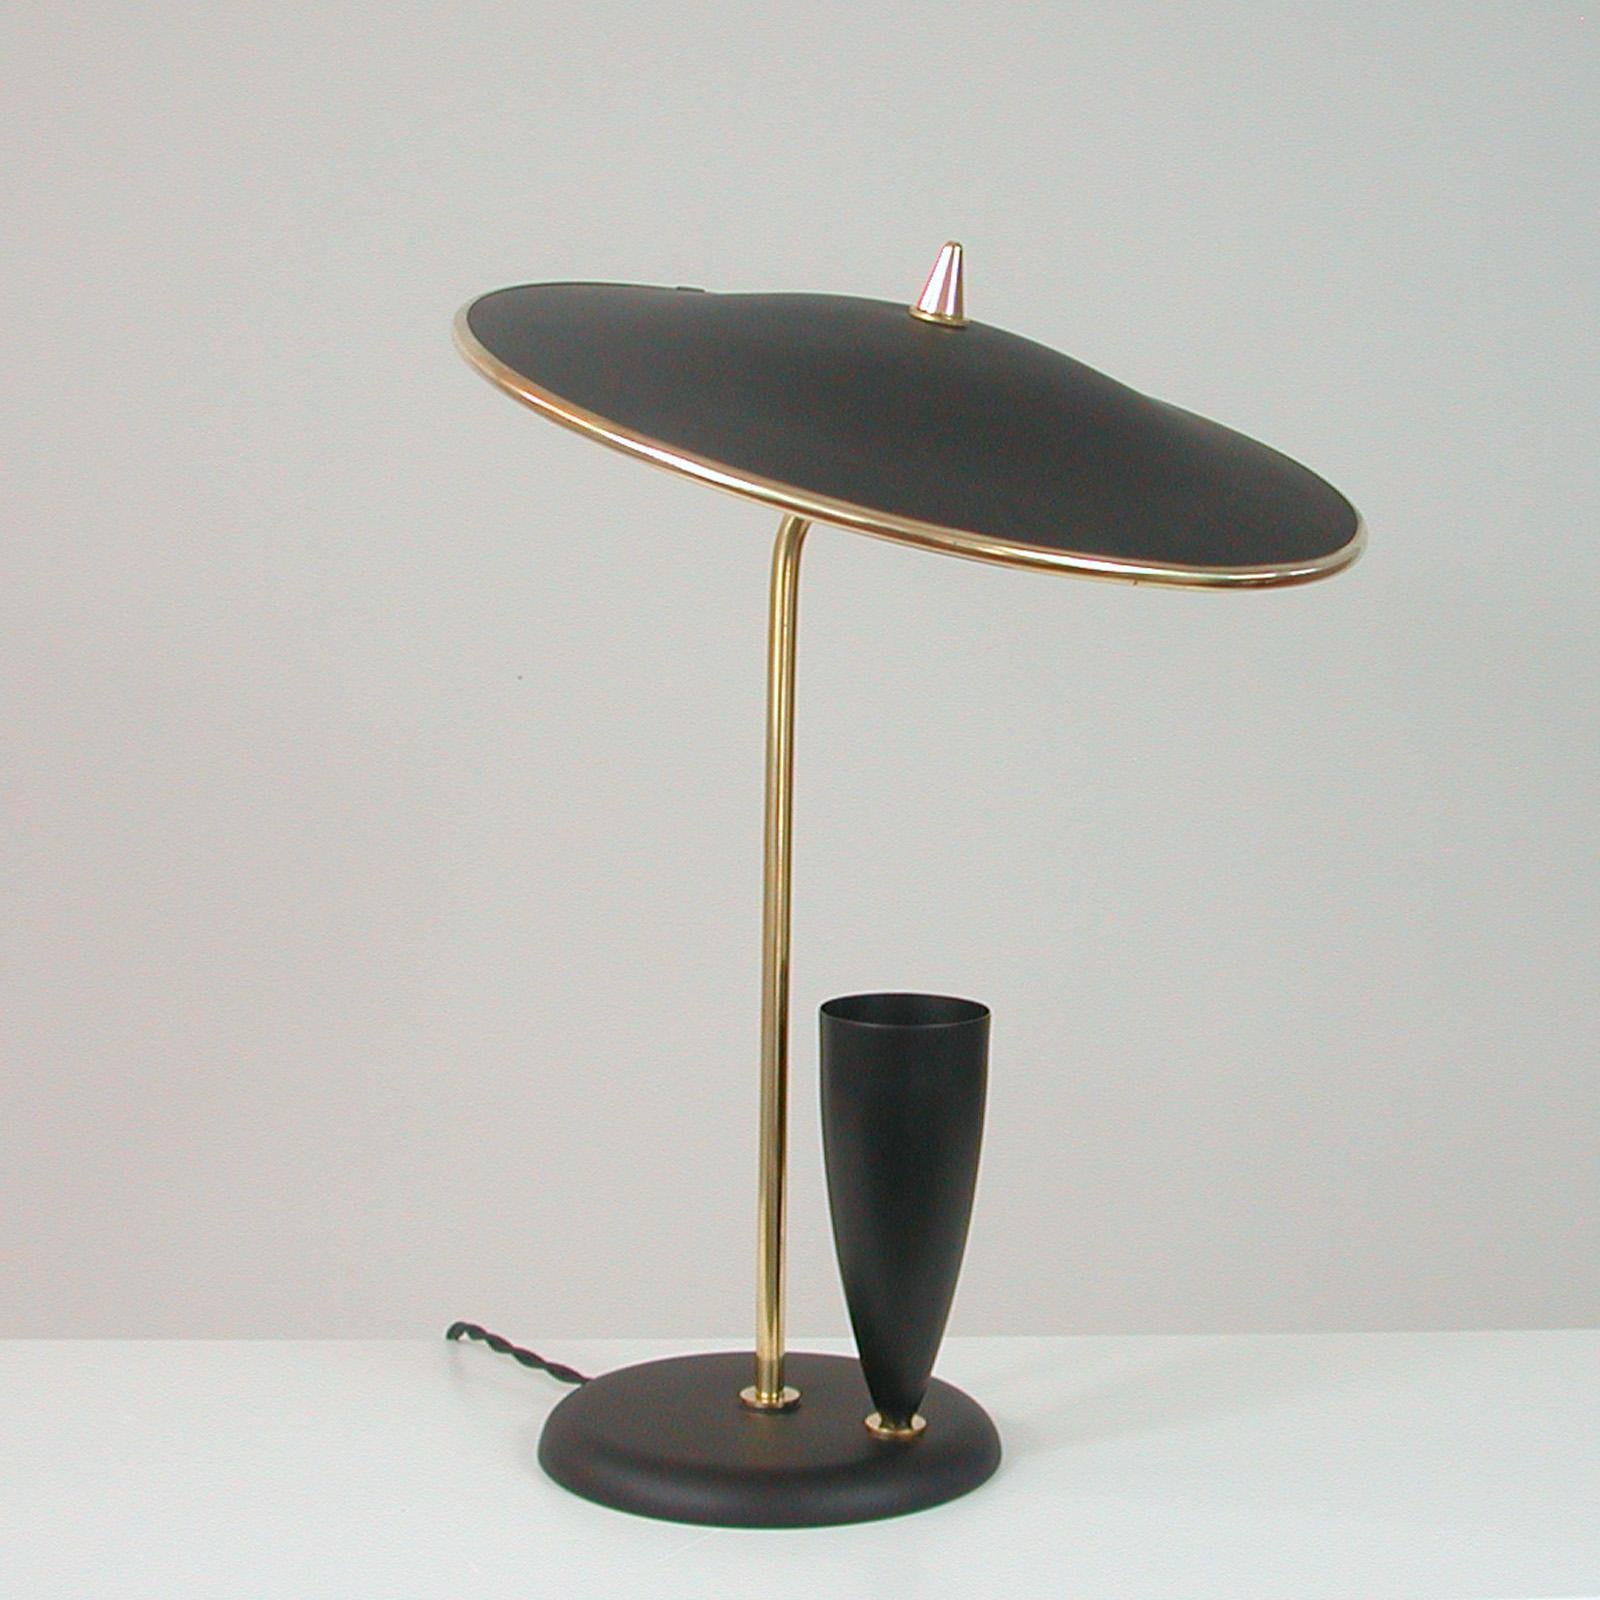 French Midcentury Reflecting Black and Brass Table Lamp, 1950s For Sale 2